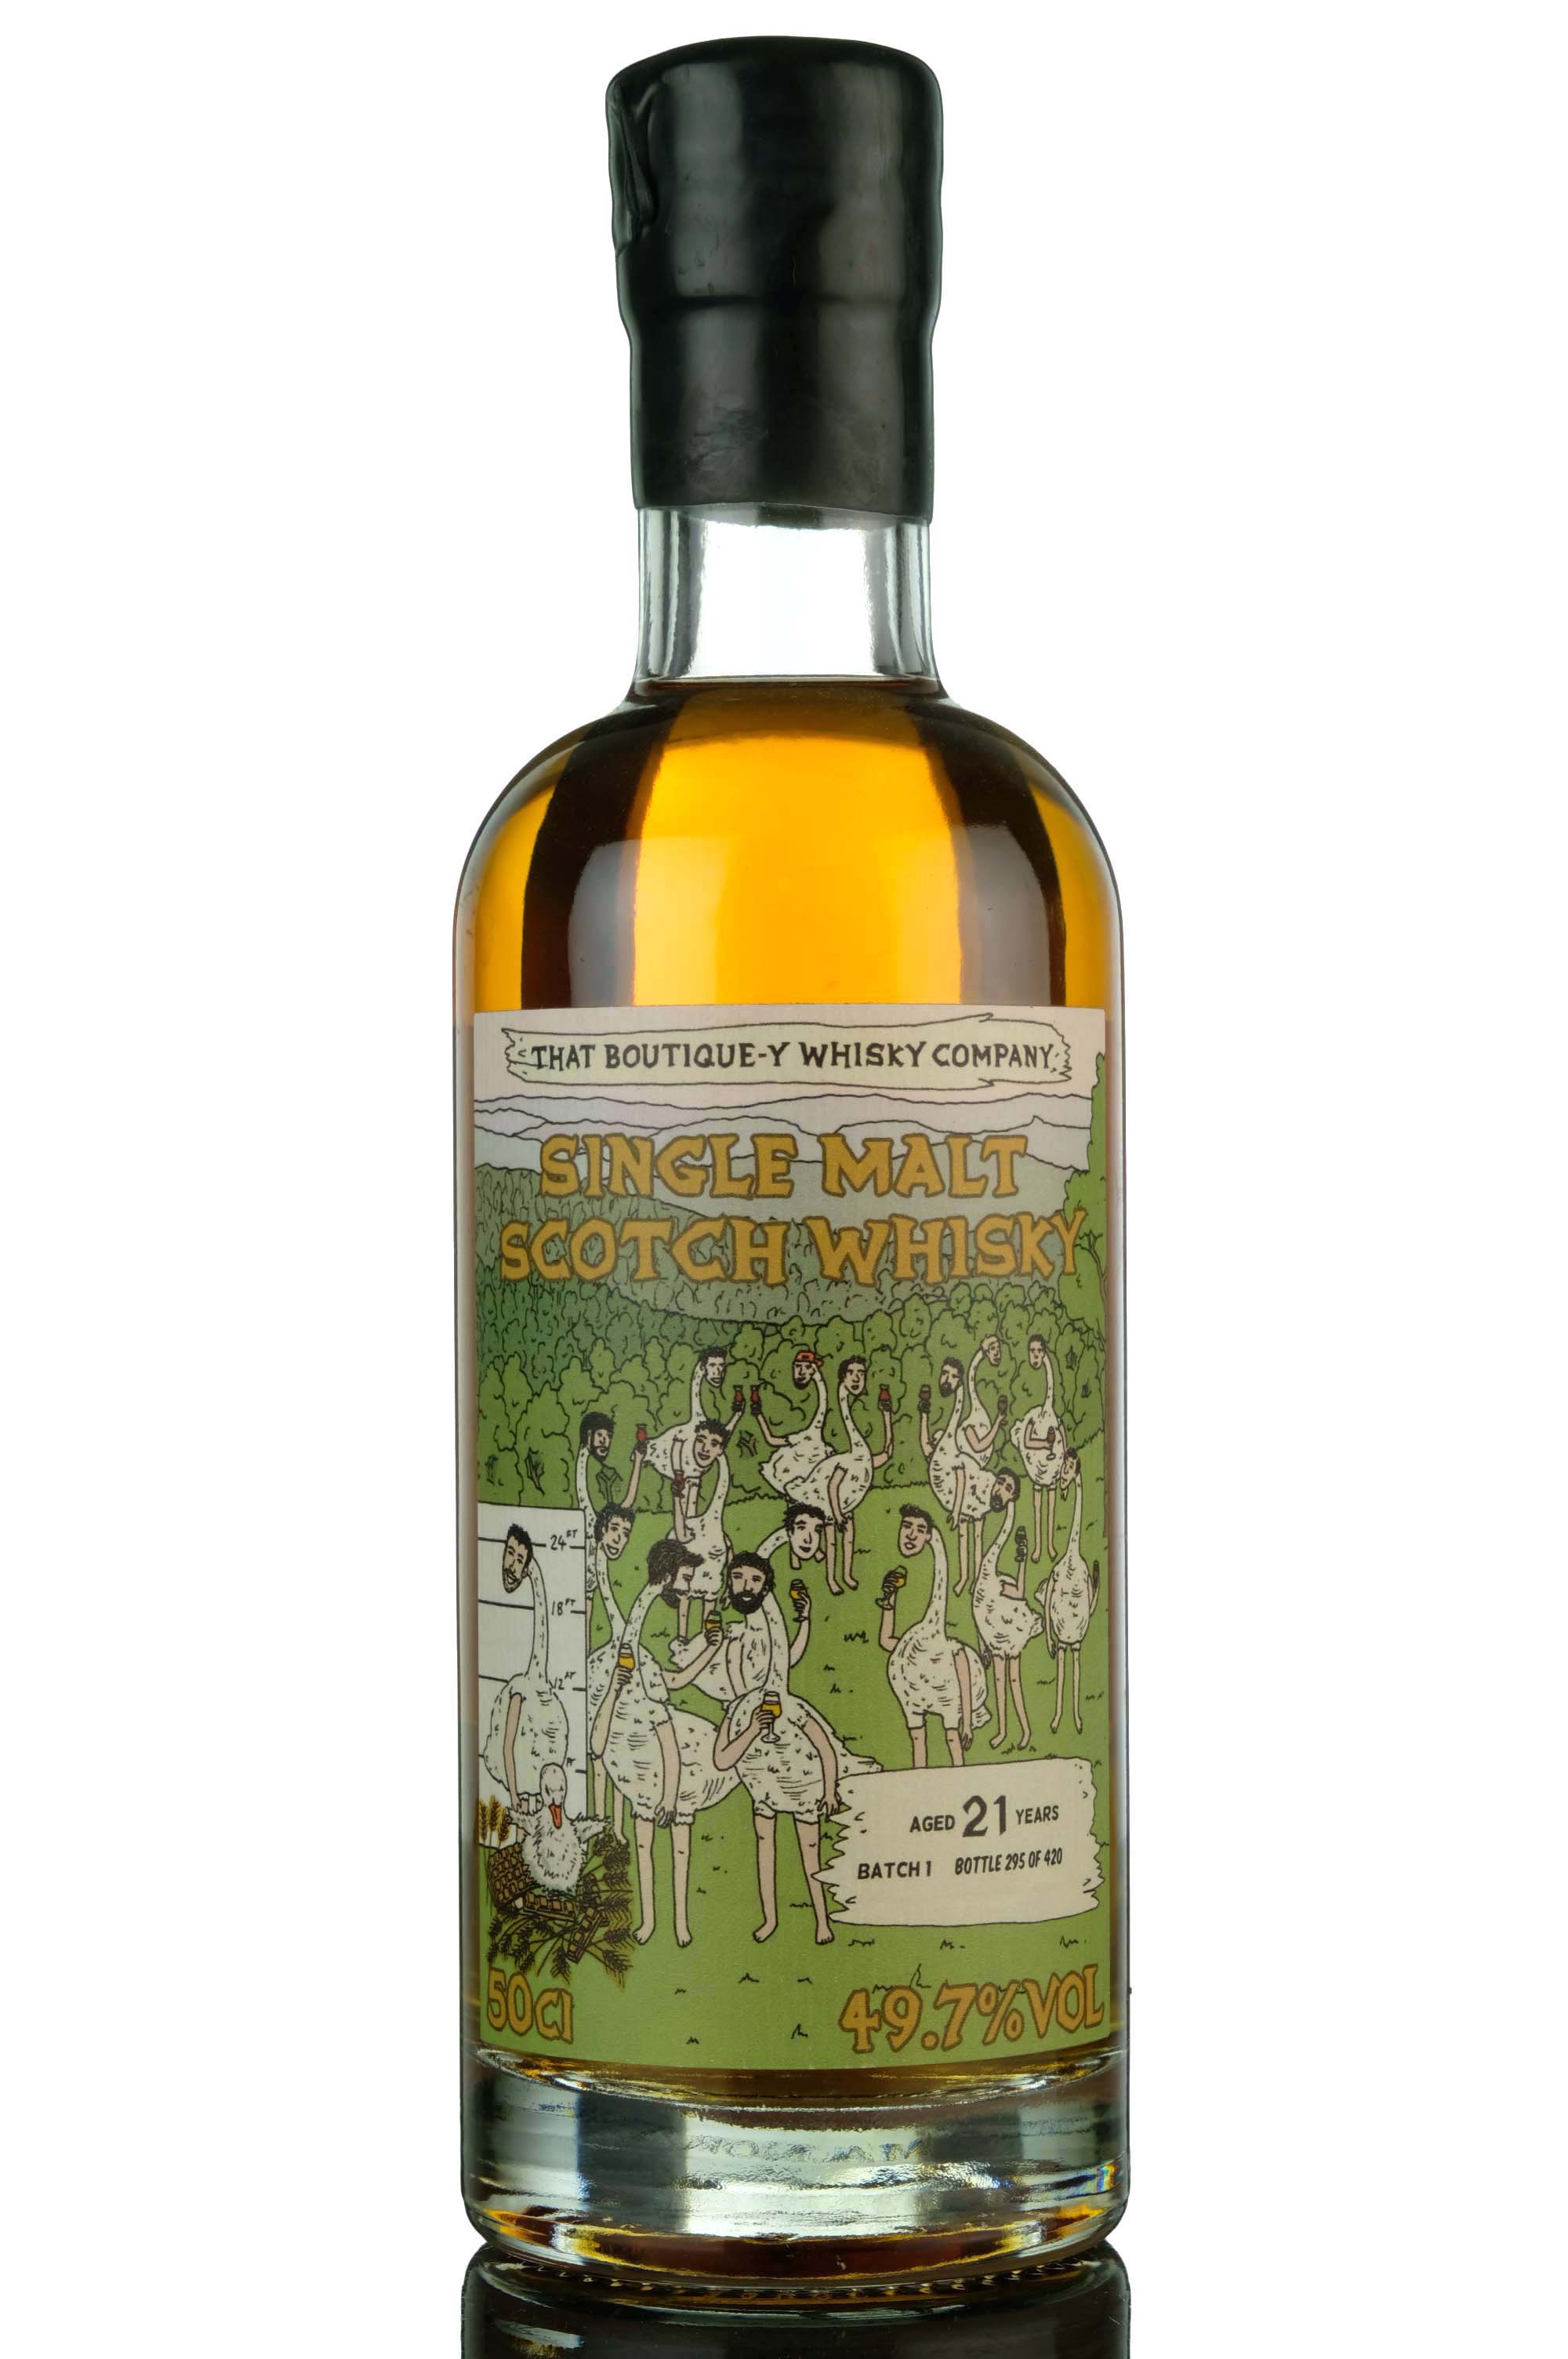 The Secret Distillery 21 Year Old - That Boutique-y Whisky Company - Batch 1 - 2016 Releas